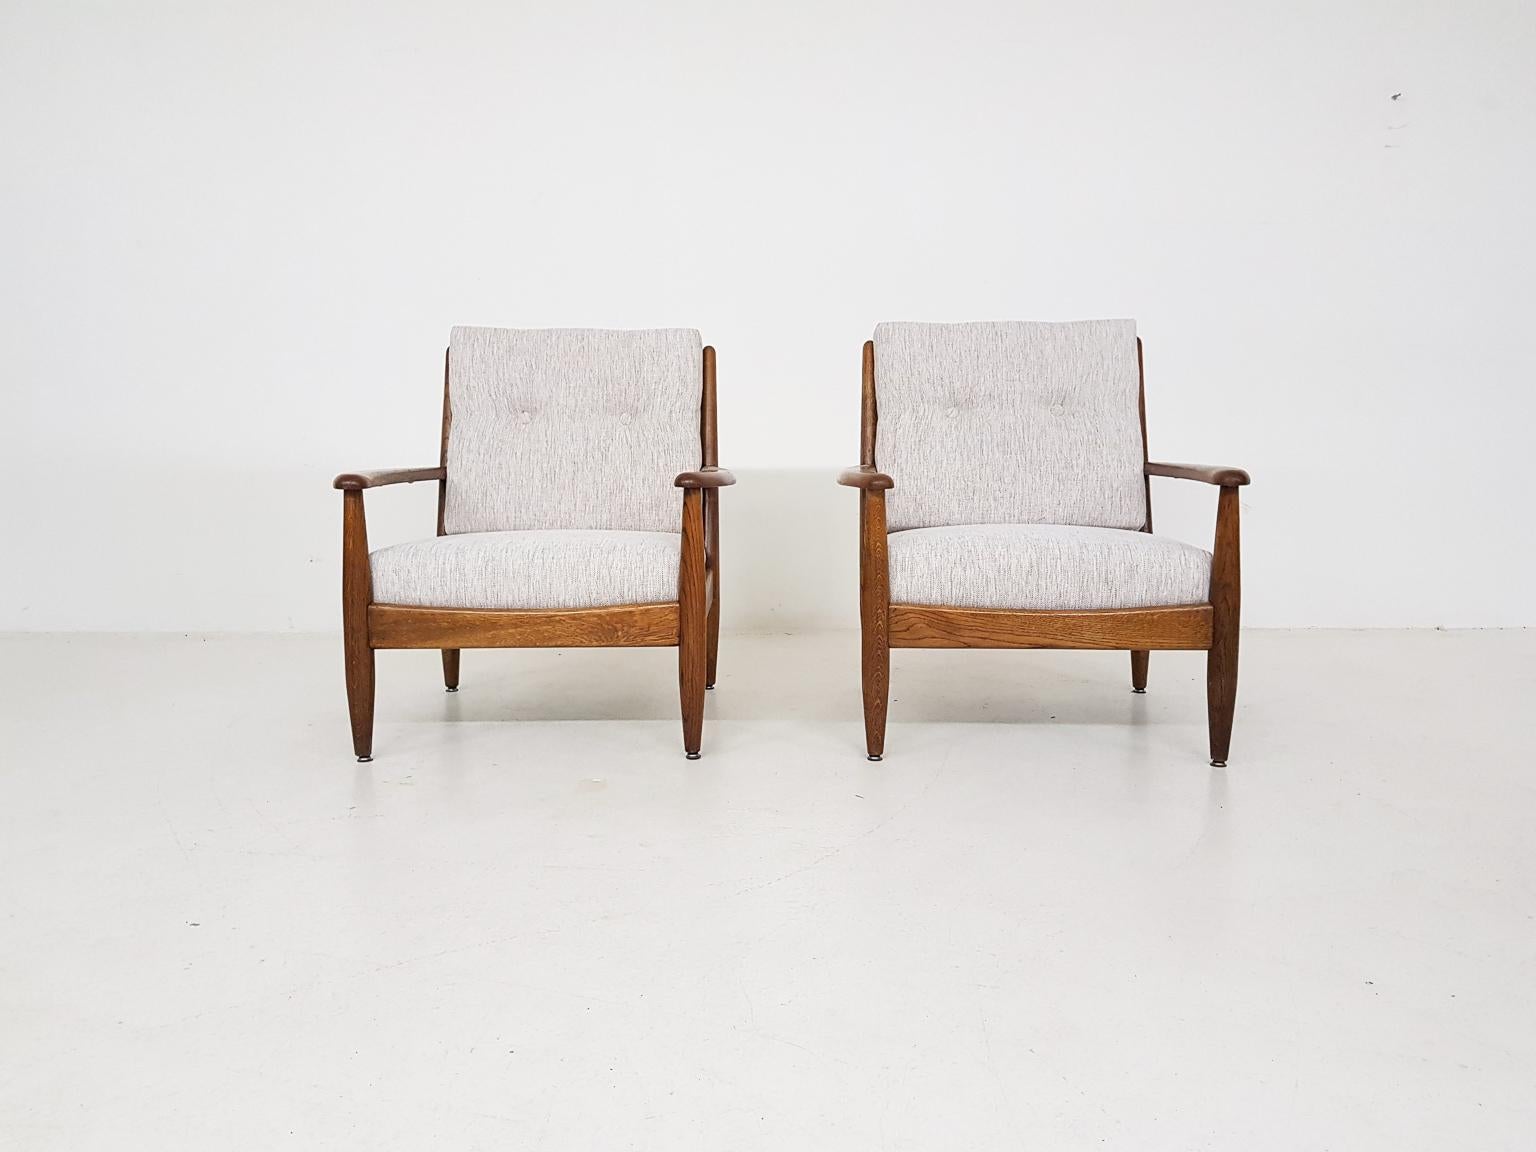 Solid oak frame and new cushions with new off-white upholstery.

We think they are made by Bovenkamp a Dutch midcentury Furniture producer. They have the same style and craftsmanship. Bovenkamp worked with Ib Kofod-Larsen and these chairs has many